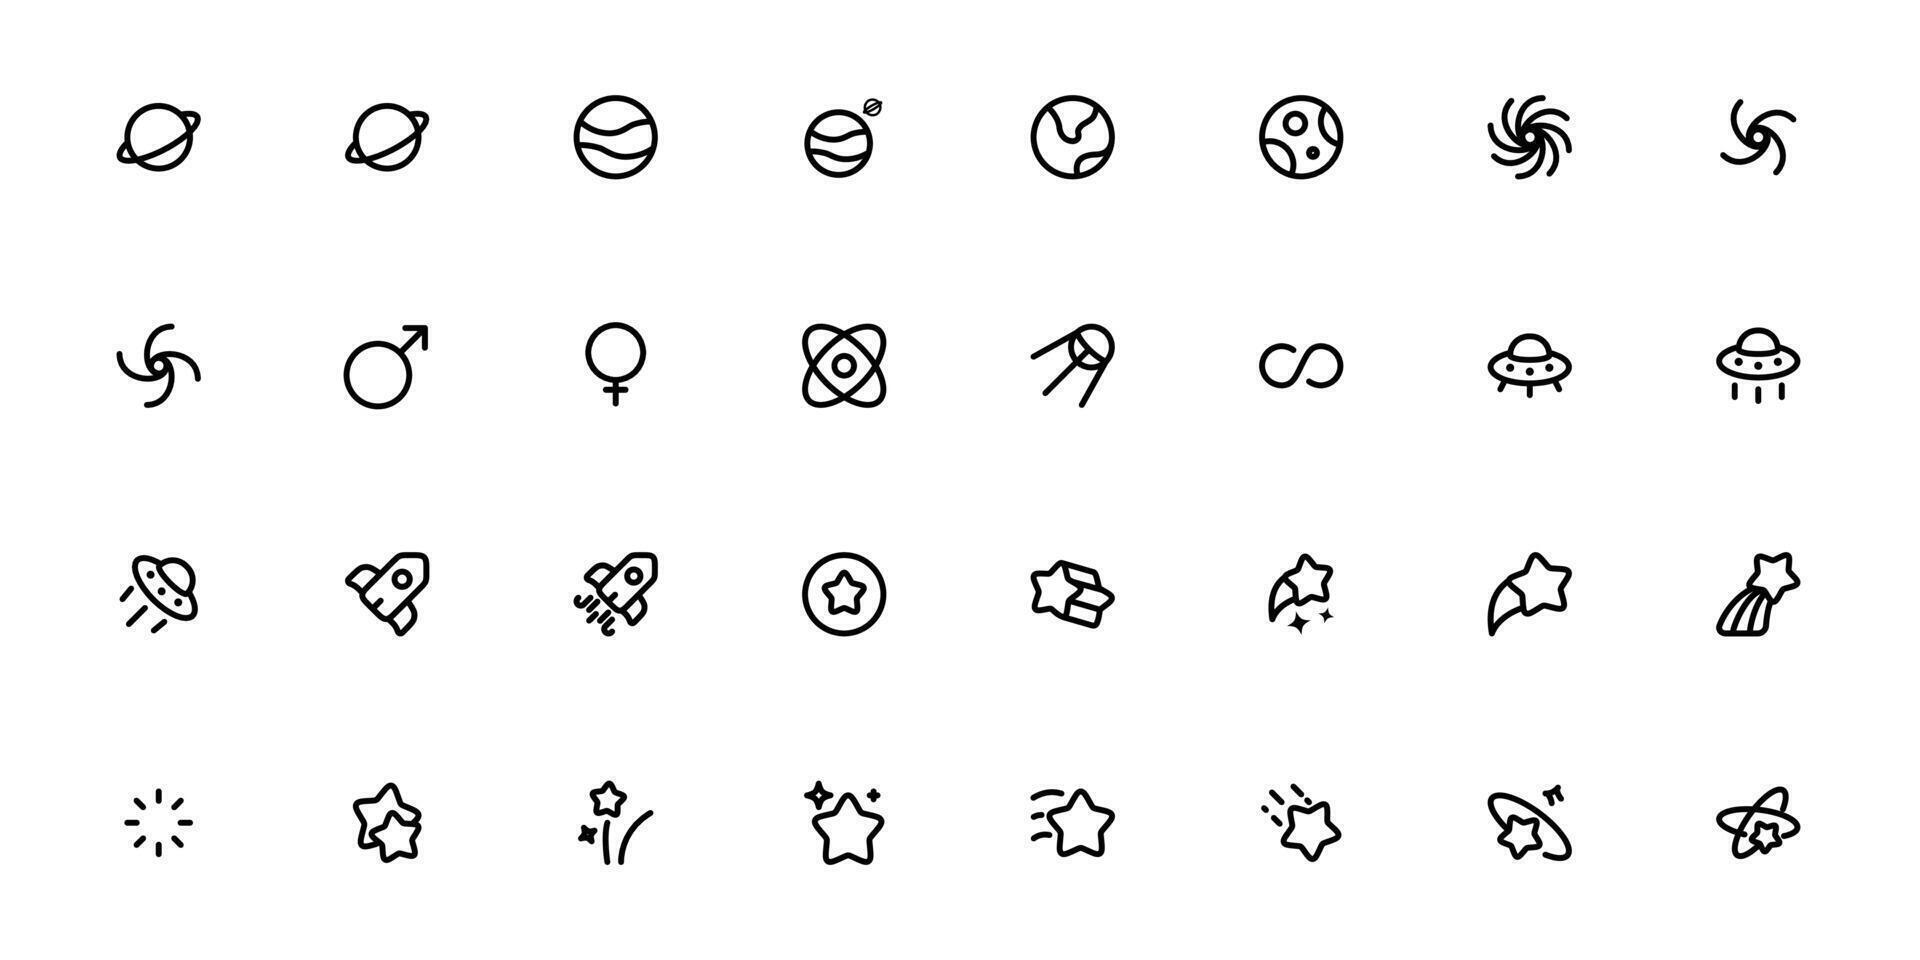 Astronomy icon set icon vector illustration in outline style